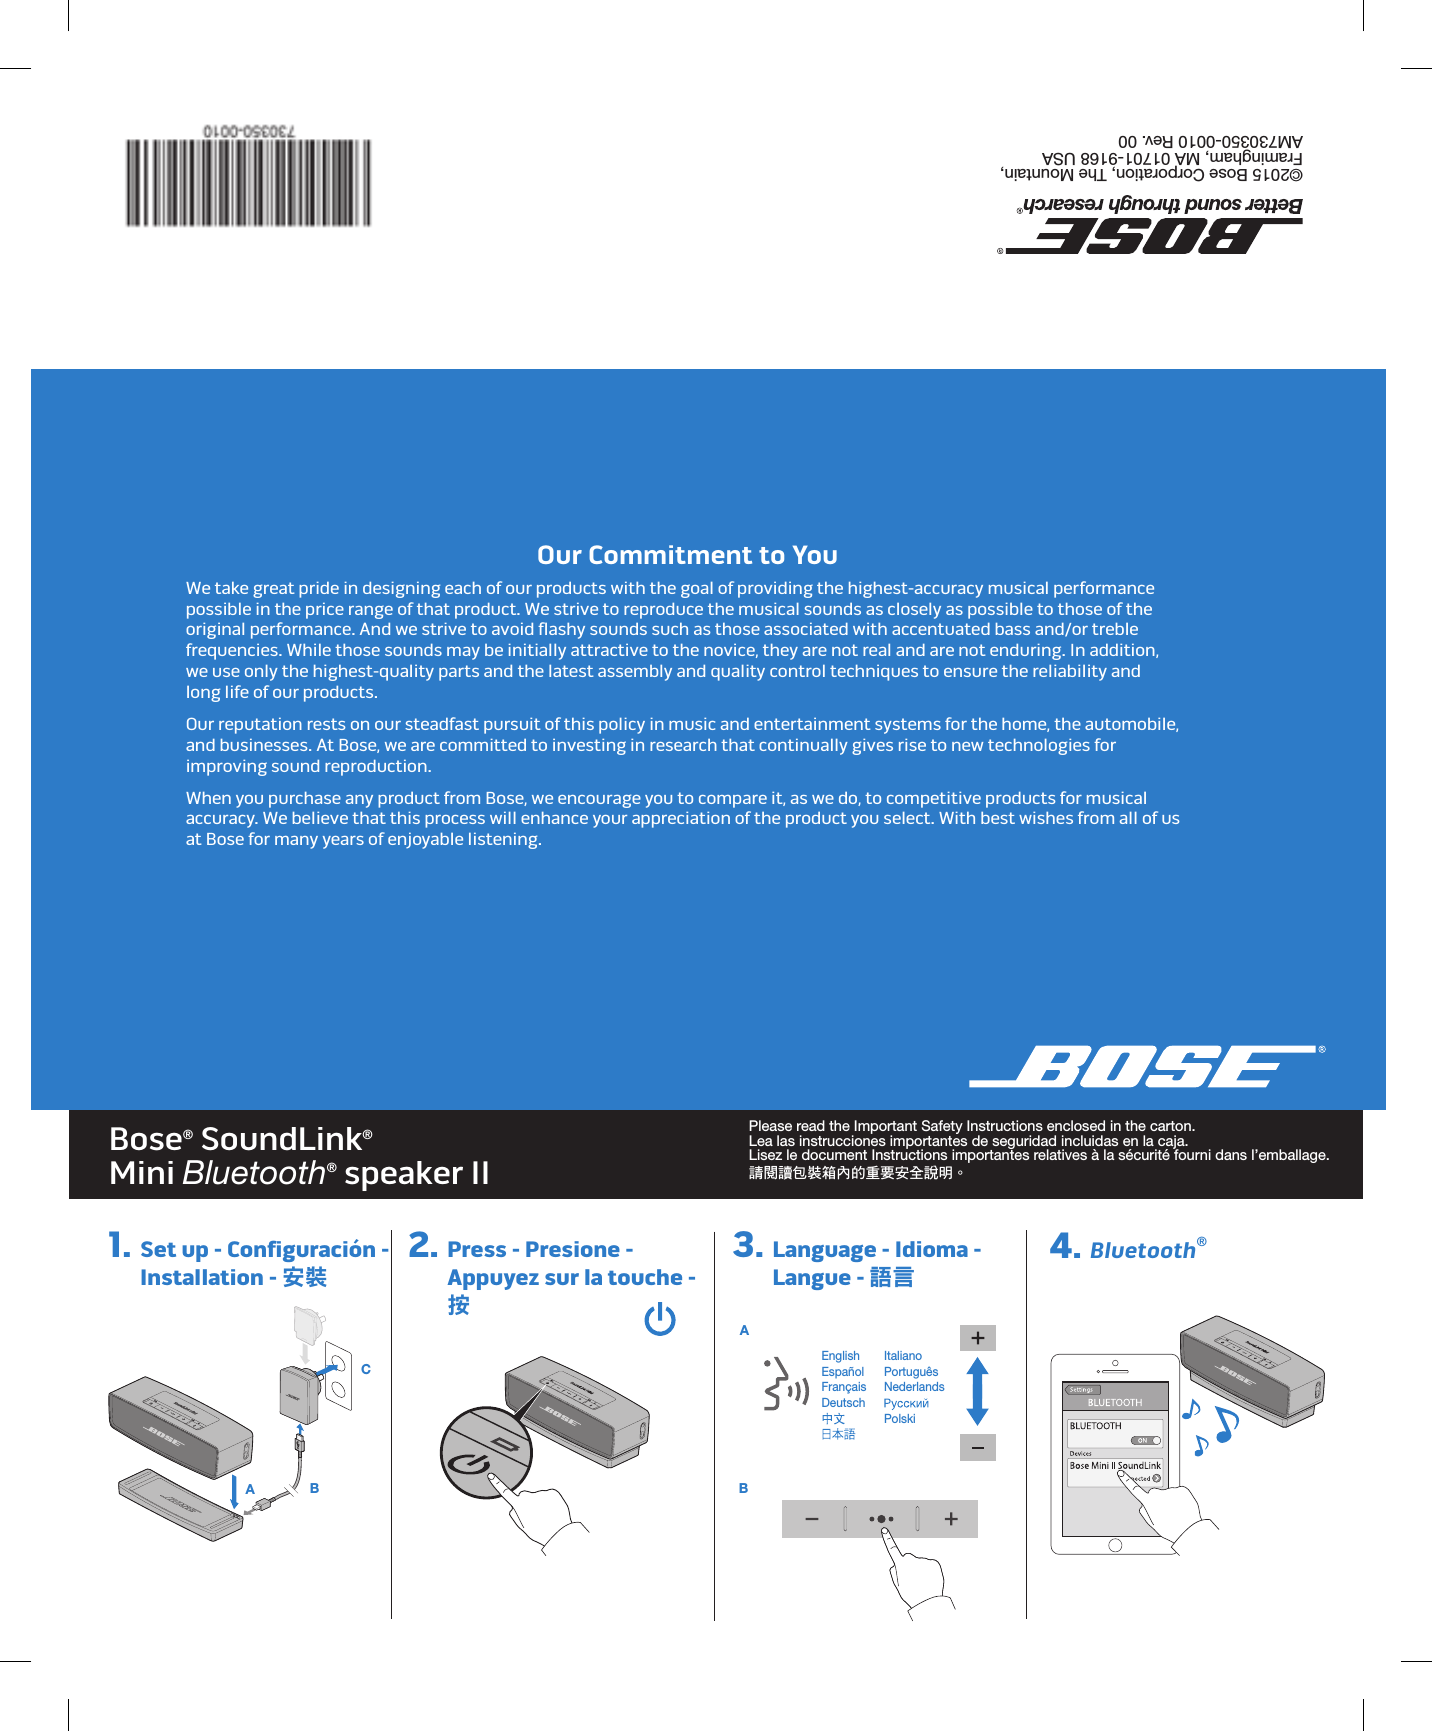 Bose® SoundLink® Mini Bluetooth® speaker II Please read the Important Safety Instructions enclosed in the carton. Lea las instrucciones importantes de seguridad incluidas en la caja. Lisez le document Instructions importantes relatives à la sécurité fourni dans l’emballage. 請閱讀包裝箱內的重要安全說明。©2015 Bose Corporation, The Mountain, Framingham, MA 01701-9168 USA  AM730350-0010 Rev. 00EnglishEspañolFrançaisDeutsch  ItalianoPortuguêsNederlands Polski 1.  Set up - Configuración -  Installation - 安裝2.  Press - Presione - Appuyez sur la touche -  按3.  Language - Idioma - Langue - 語言 4. Bluetooth®Our Commitment to YouWe take great pride in designing each of our products with the goal of providing the highest-accuracy musical performance possible in the price range of that product. We strive to reproduce the musical sounds as closely as possible to those of the original performance. And we strive to avoid flashy sounds such as those associated with accentuated bass and/or treble frequencies. While those sounds may be initially attractive to the novice, they are not real and are not enduring. In addition,  we use only the highest-quality parts and the latest assembly and quality control techniques to ensure the reliability and  long life of our products.Our reputation rests on our steadfast pursuit of this policy in music and entertainment systems for the home, the automobile, and businesses. At Bose, we are committed to investing in research that continually gives rise to new technologies for improving sound reproduction.When you purchase any product from Bose, we encourage you to compare it, as we do, to competitive products for musical accuracy. We believe that this process will enhance your appreciation of the product you select. With best wishes from all of us at Bose for many years of enjoyable listening. A   B C A  B8.6310.6224.374.250.44R (5X)